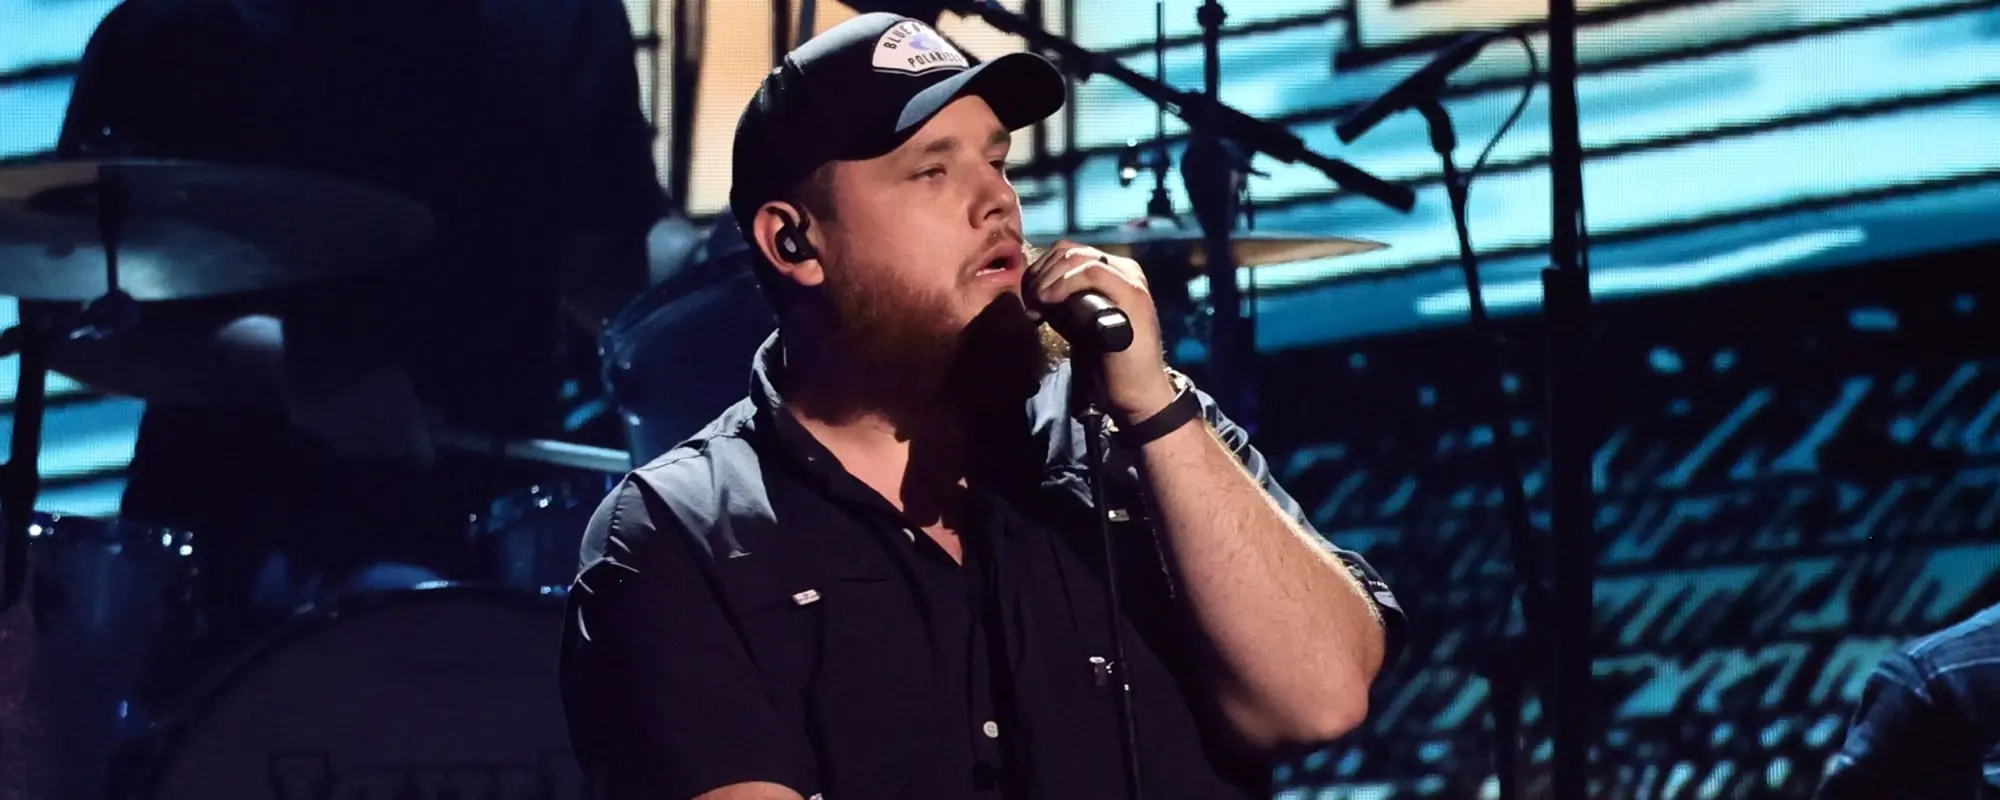 Luke Combs Shares Snippet of New Song "Plant a Seed," Tells His Fans